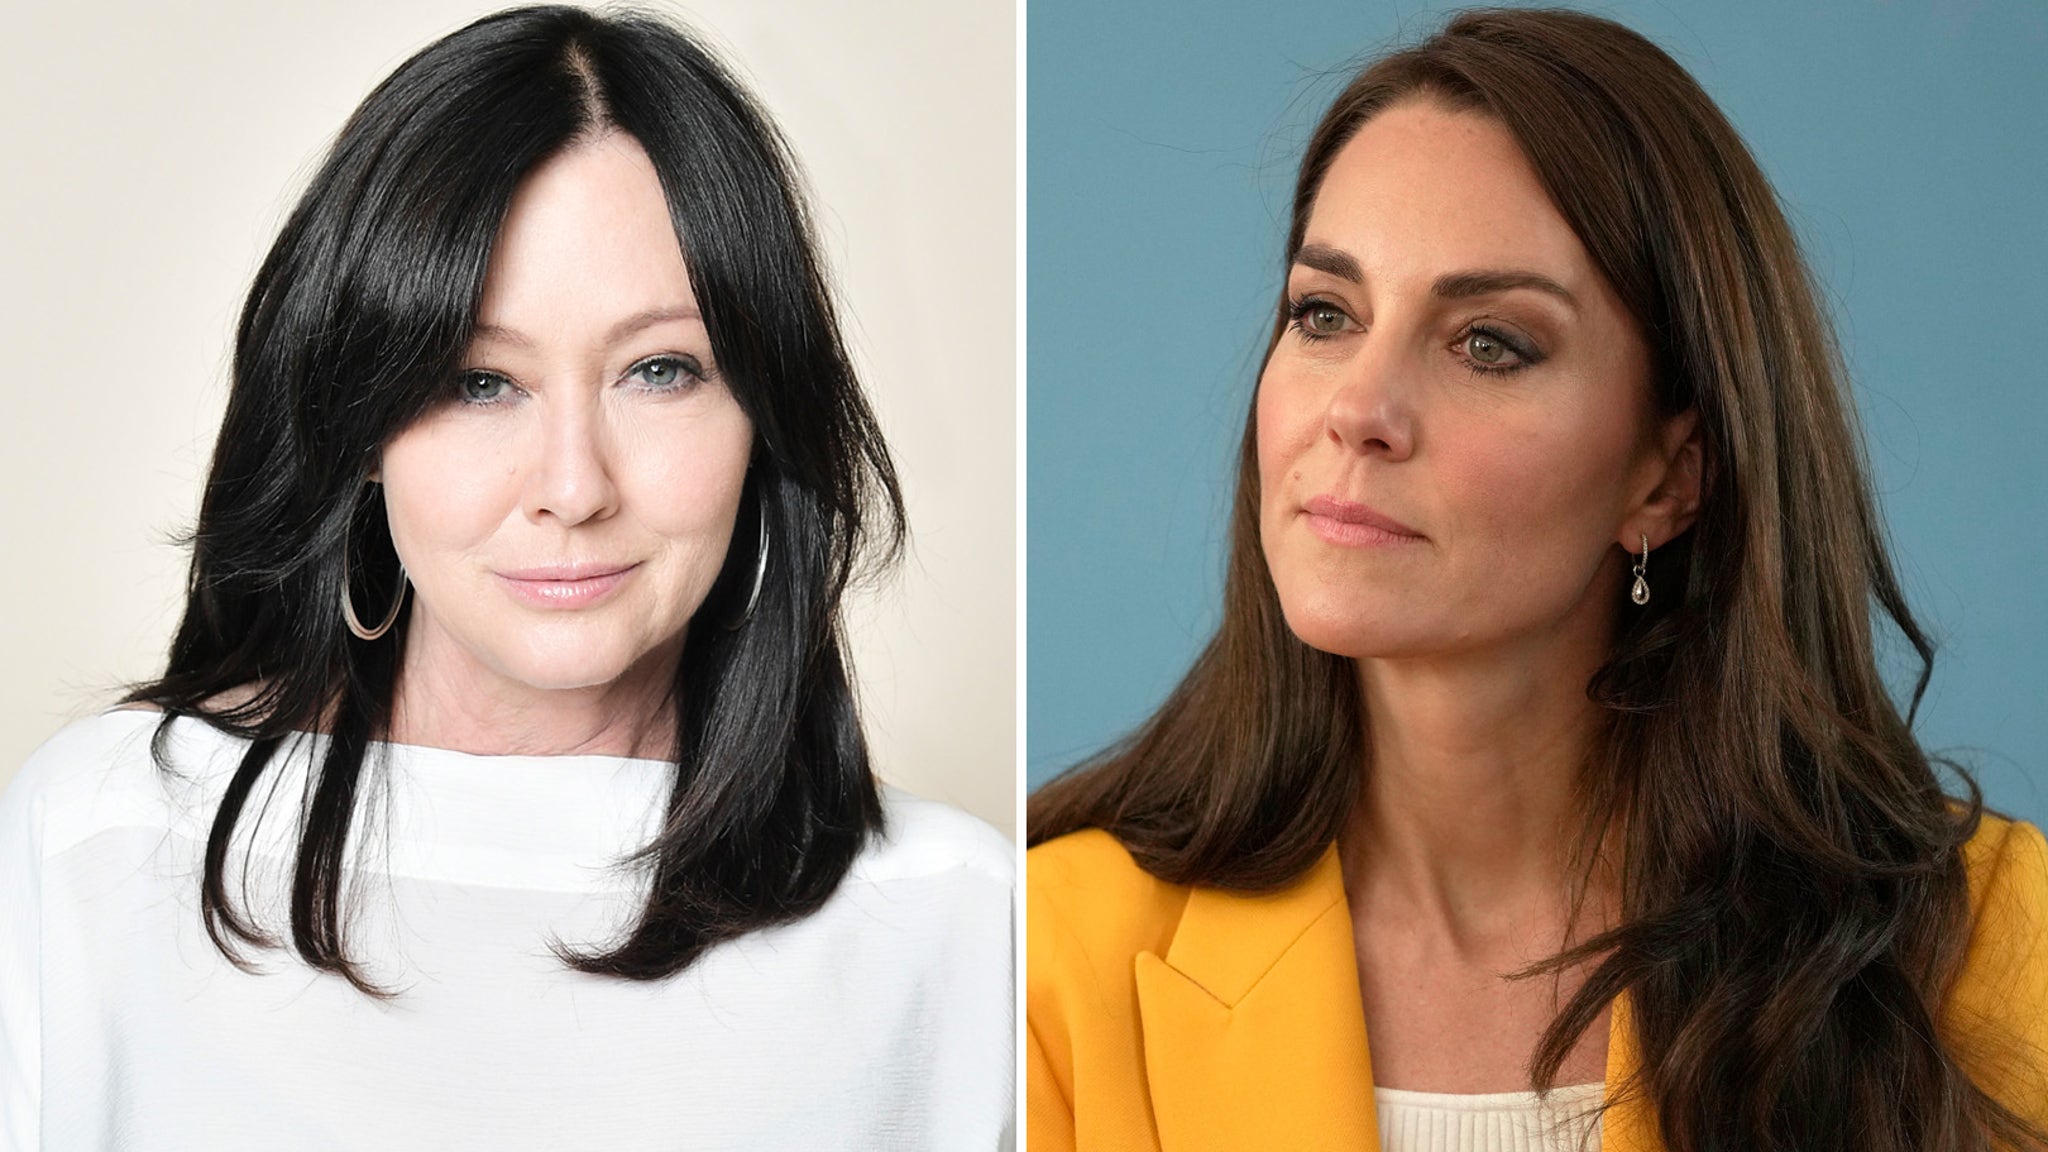 Shannen Doherty Praises Kate Middleton's 'Strength' After Cancer Diagnosis Reveal